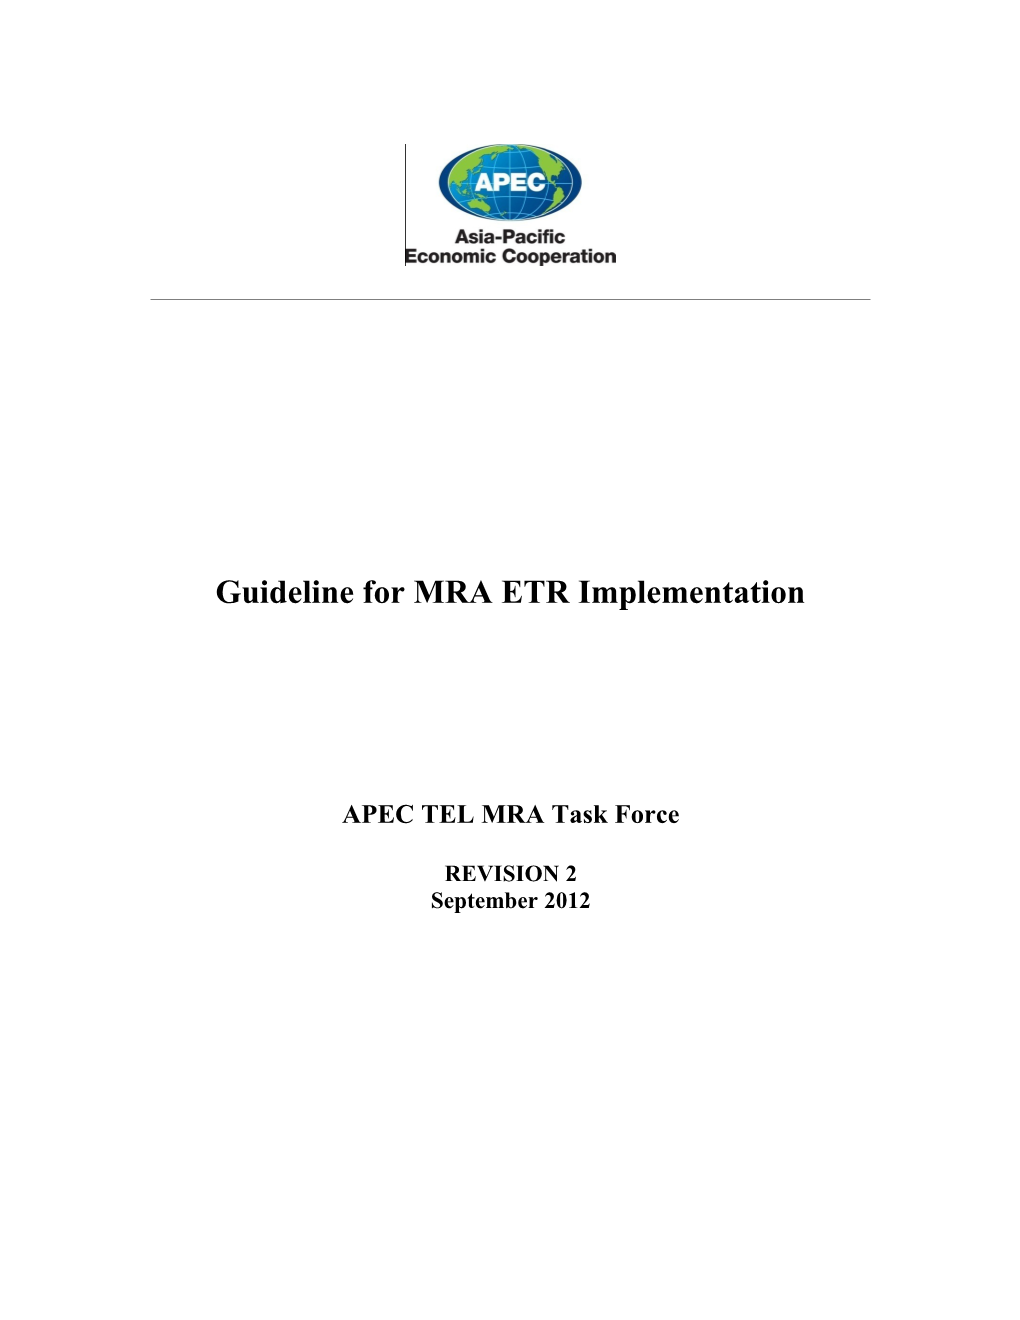 Guidelines to Implement MRA ETR